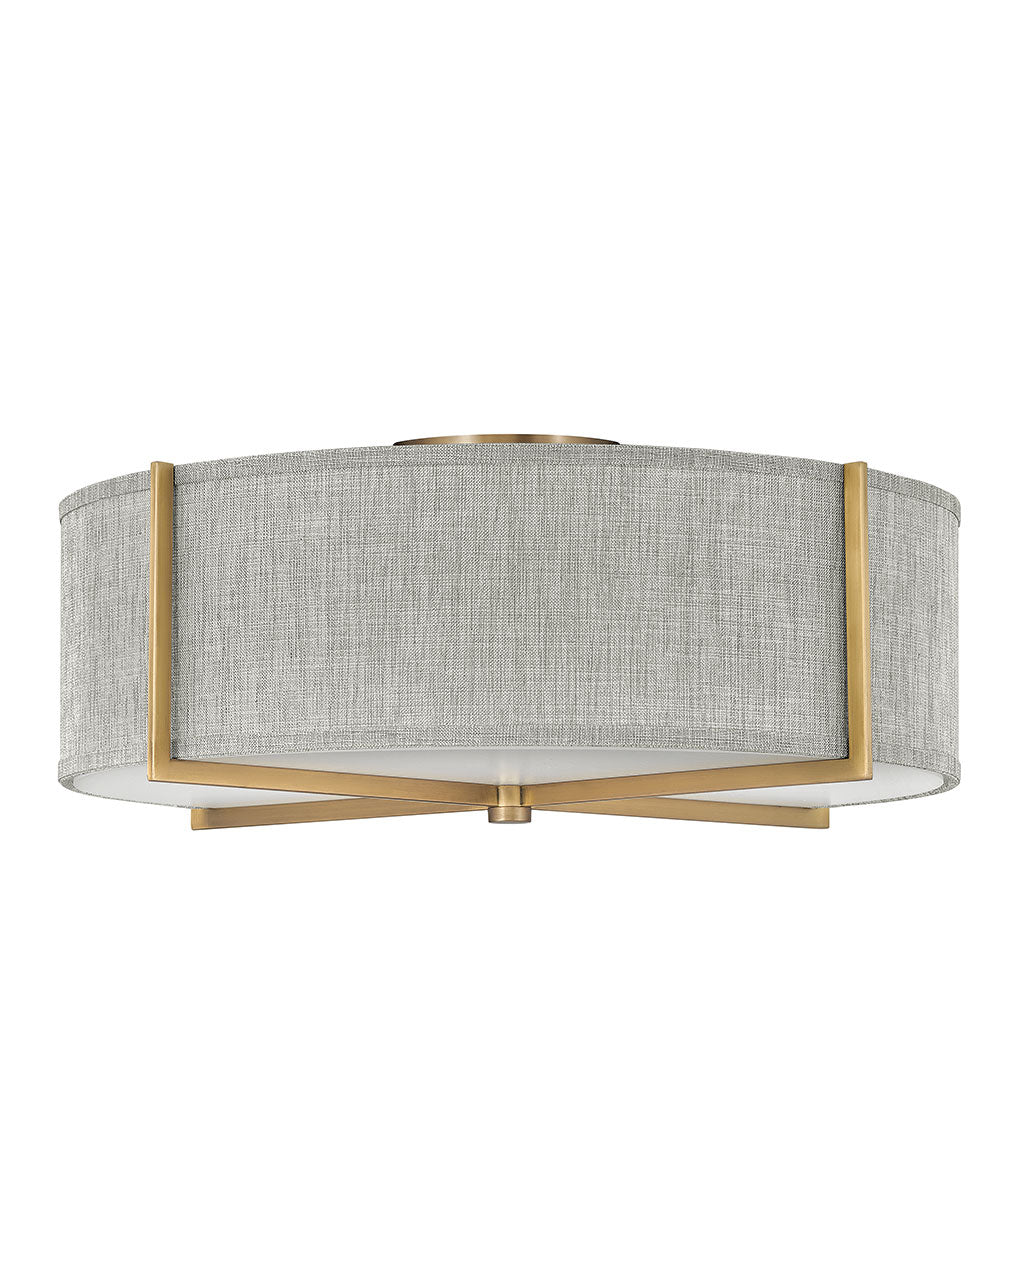 Hinkley - 41709HB - LED Foyer Pendant - Axis Heathered Gray - Heritage Brass